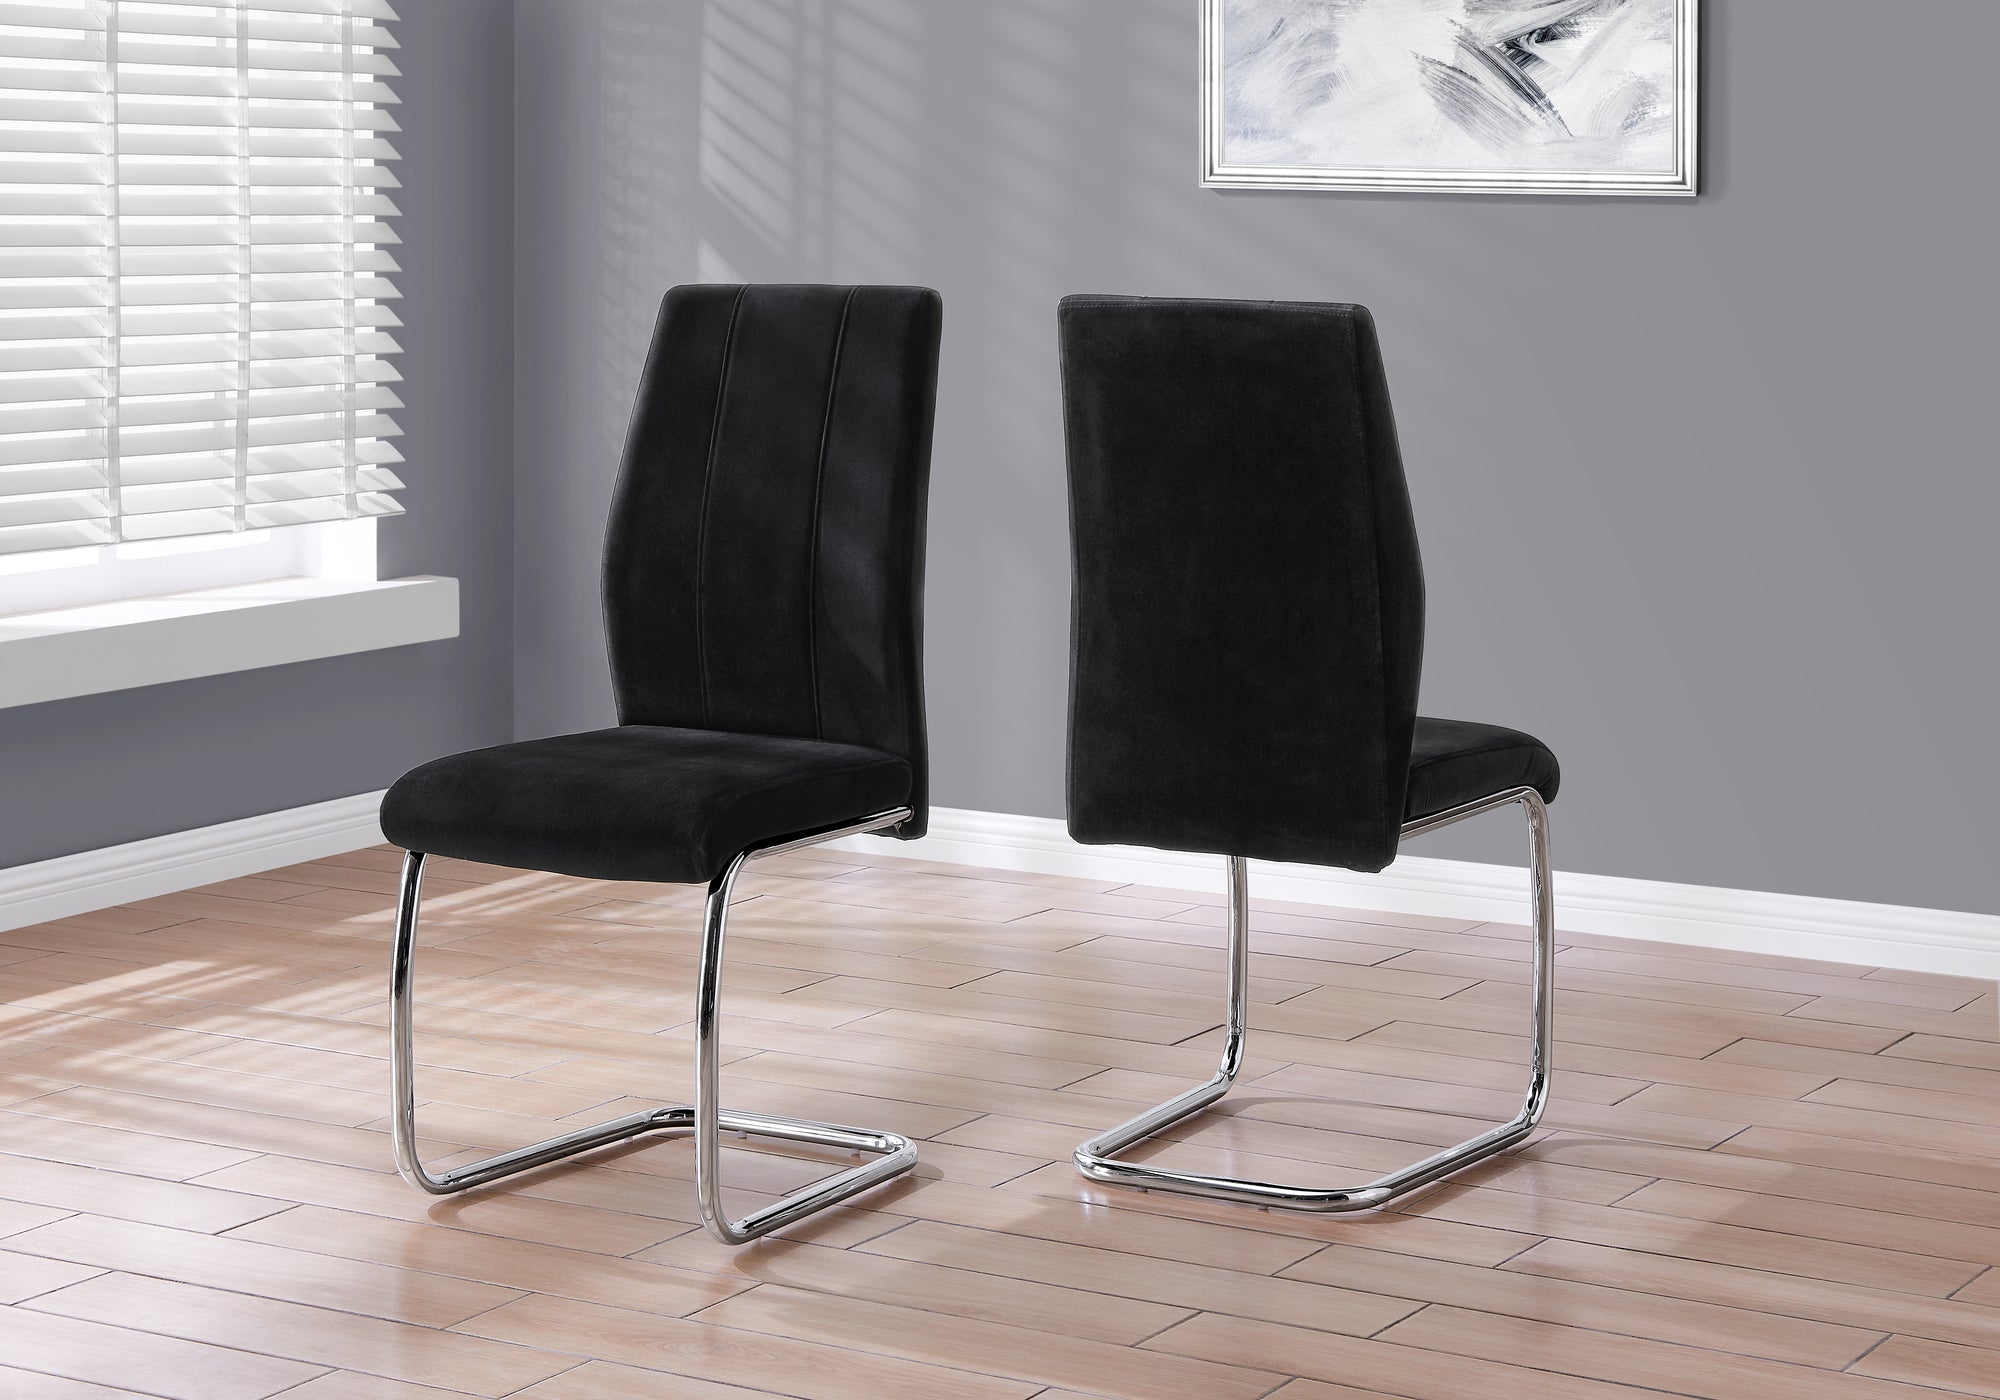 MN-321067    Dining Chair, Set Of 2, Side, Pu Leather-Look, Upholstered, Metal Legs, Kitchen, Dining Room, Velvet, Metal Legs, Black, Chrome, Contemporary, Modern